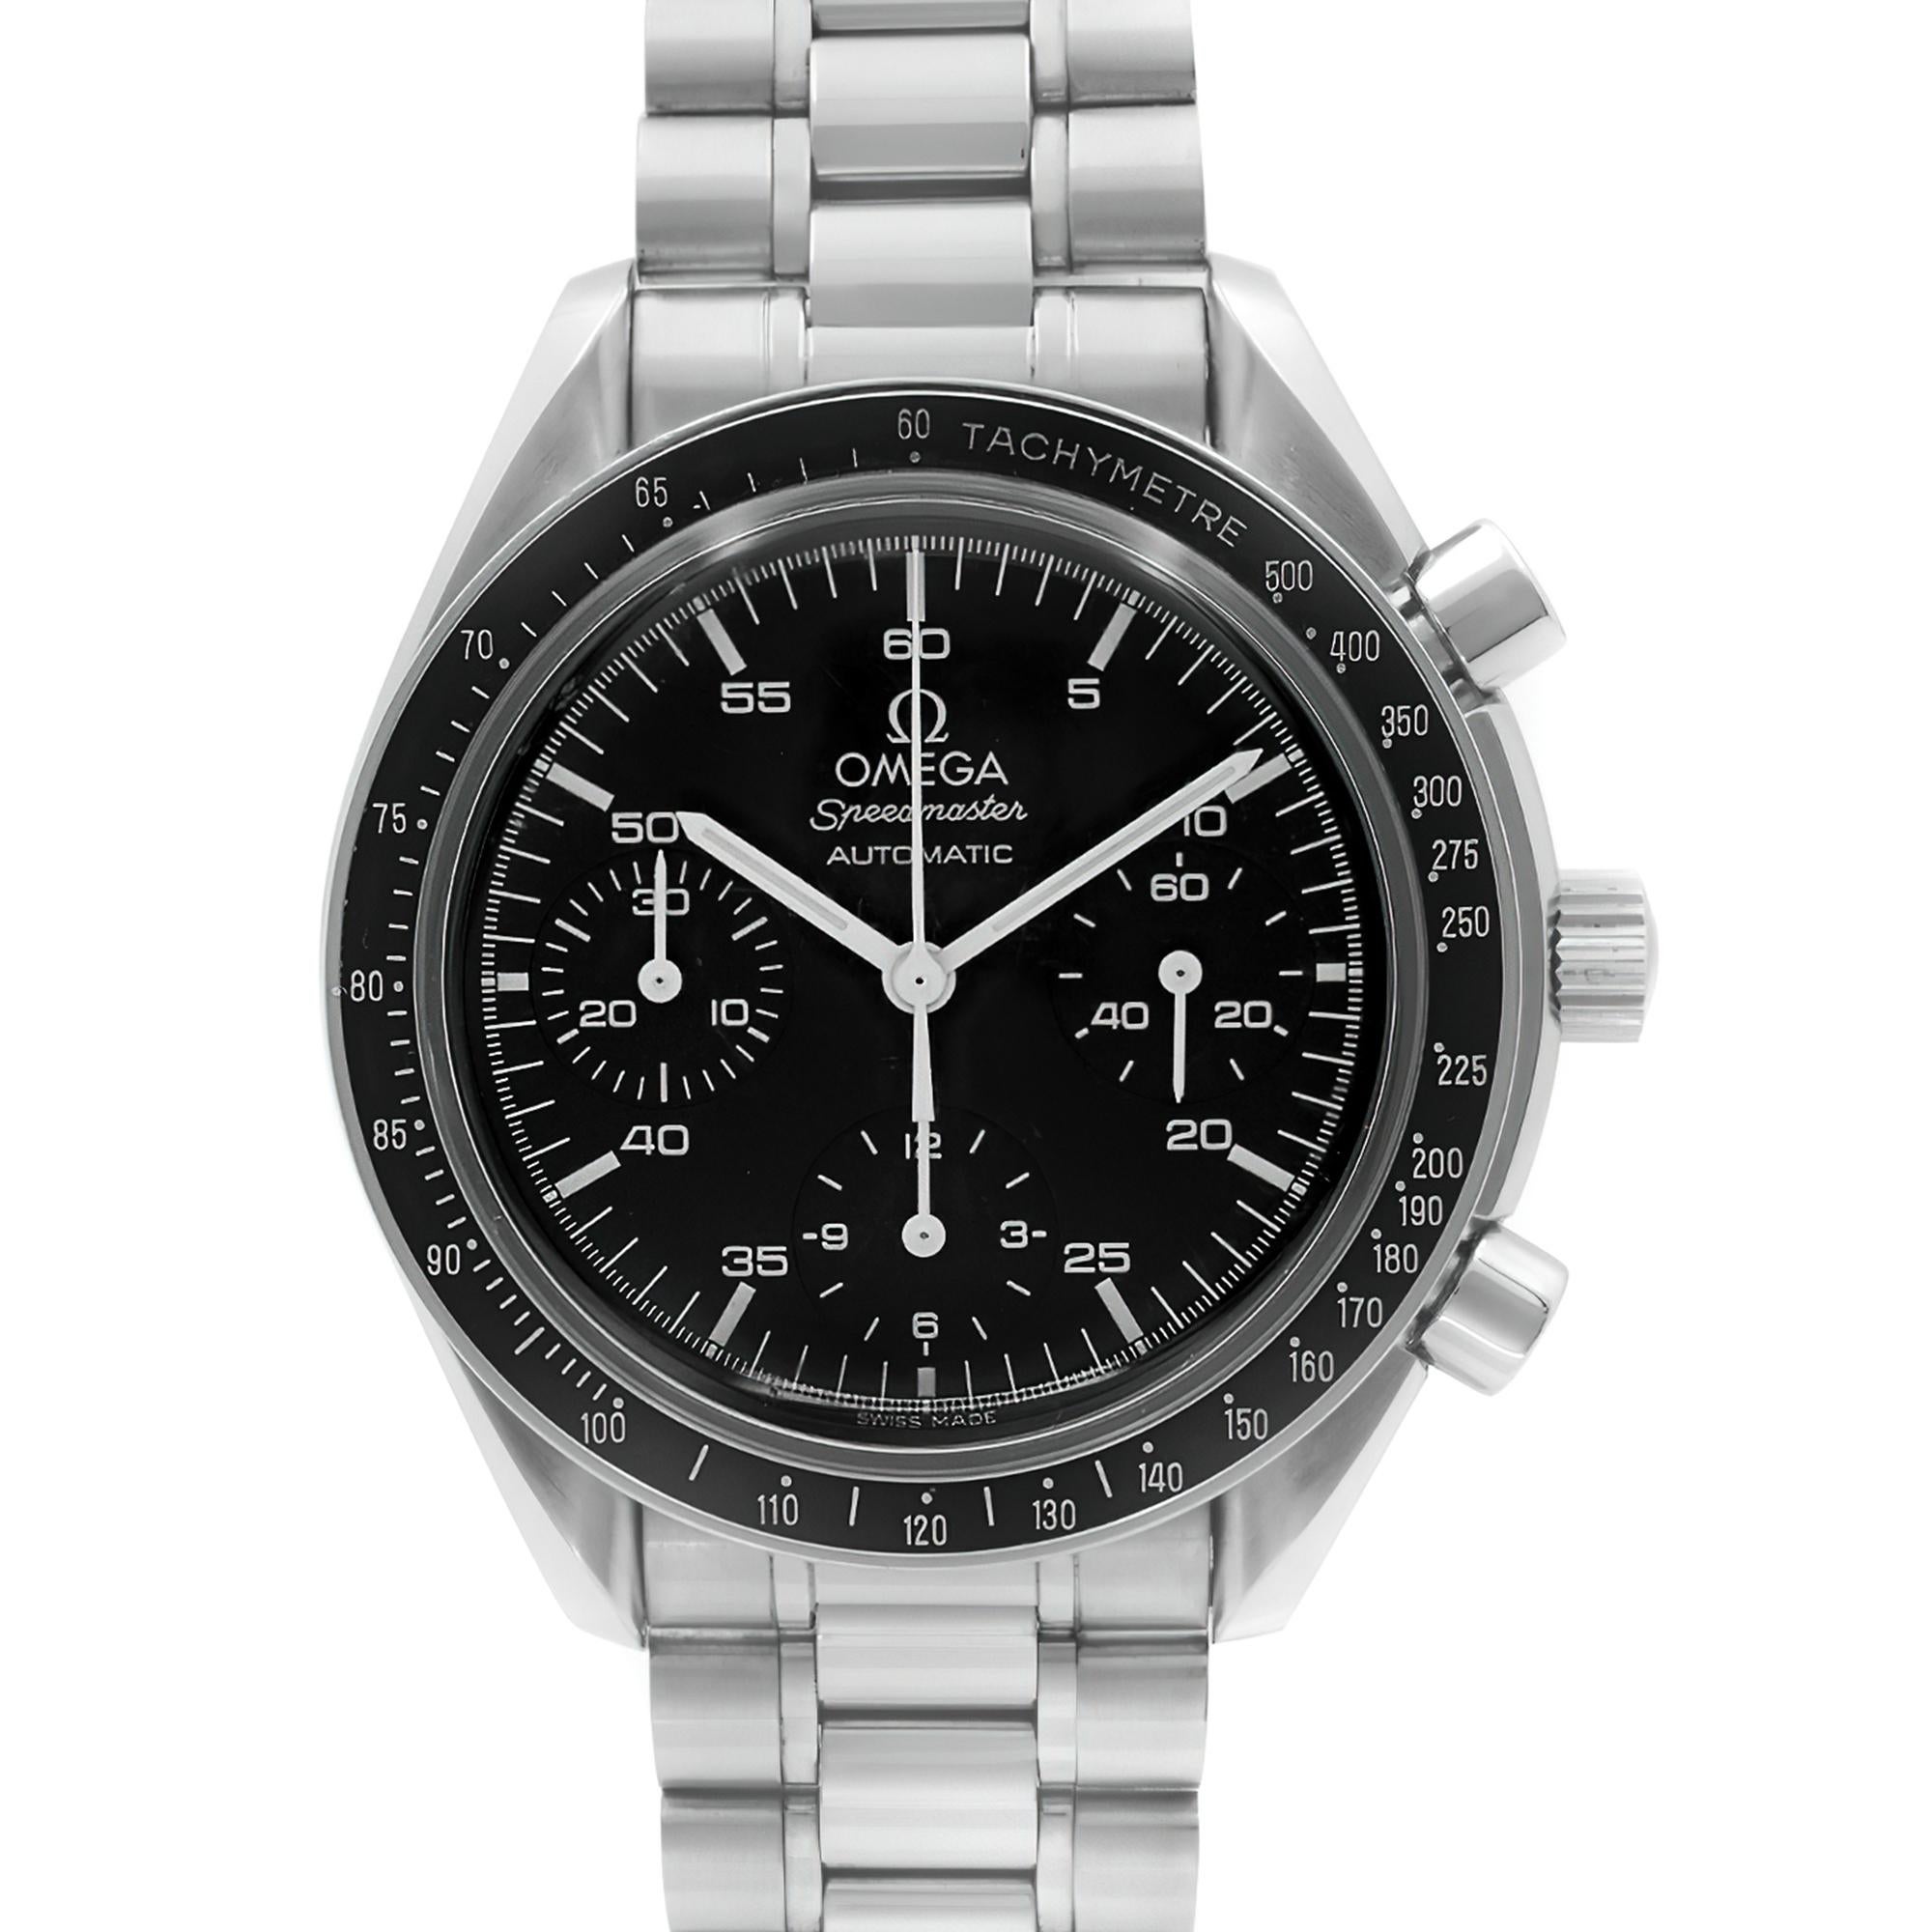 Pre Owned Omega Speedmaster Reduced 39mm Steel Black Dial Automatic Watch 3510.50.00. This Beautiful Timepiece Features: Stainless Steel Case & Bracelet Fixed Stainless Steel Bezel with Black Tachymeter Scale Top Ring, Black Dial with Luminous White